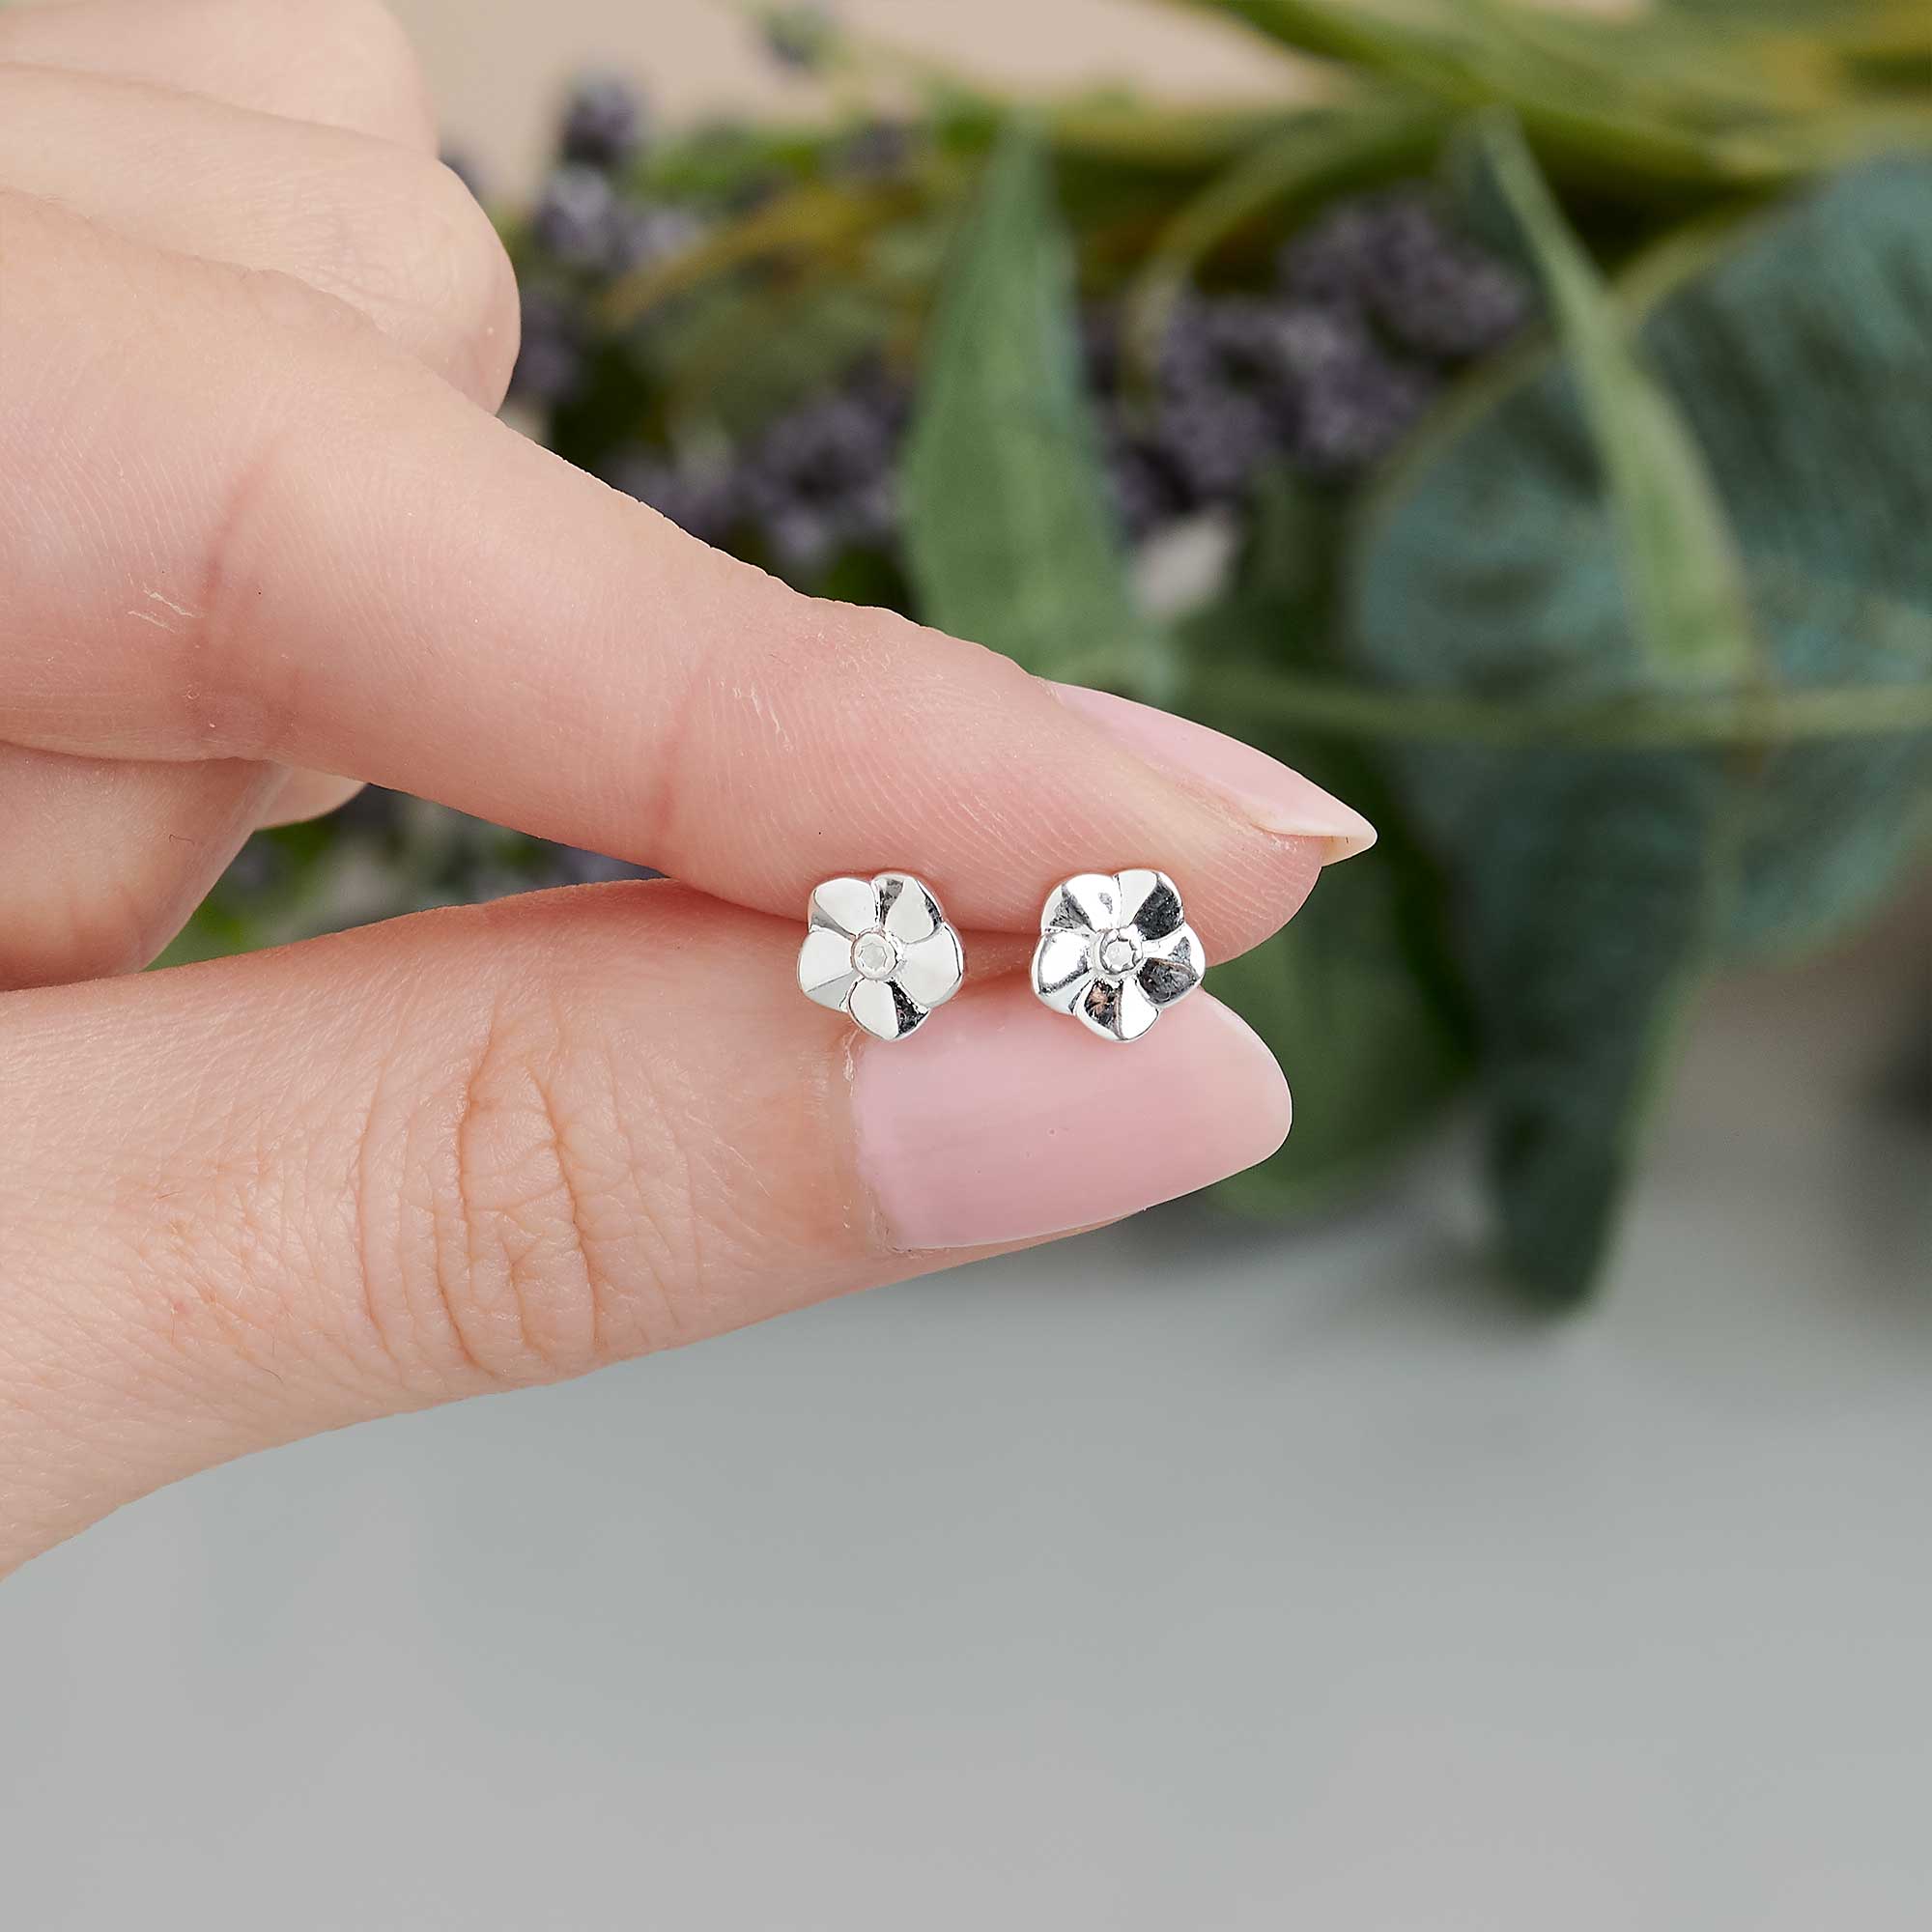 tiny but perfectly formed Forget-Me-Not studs make beautiful little studs